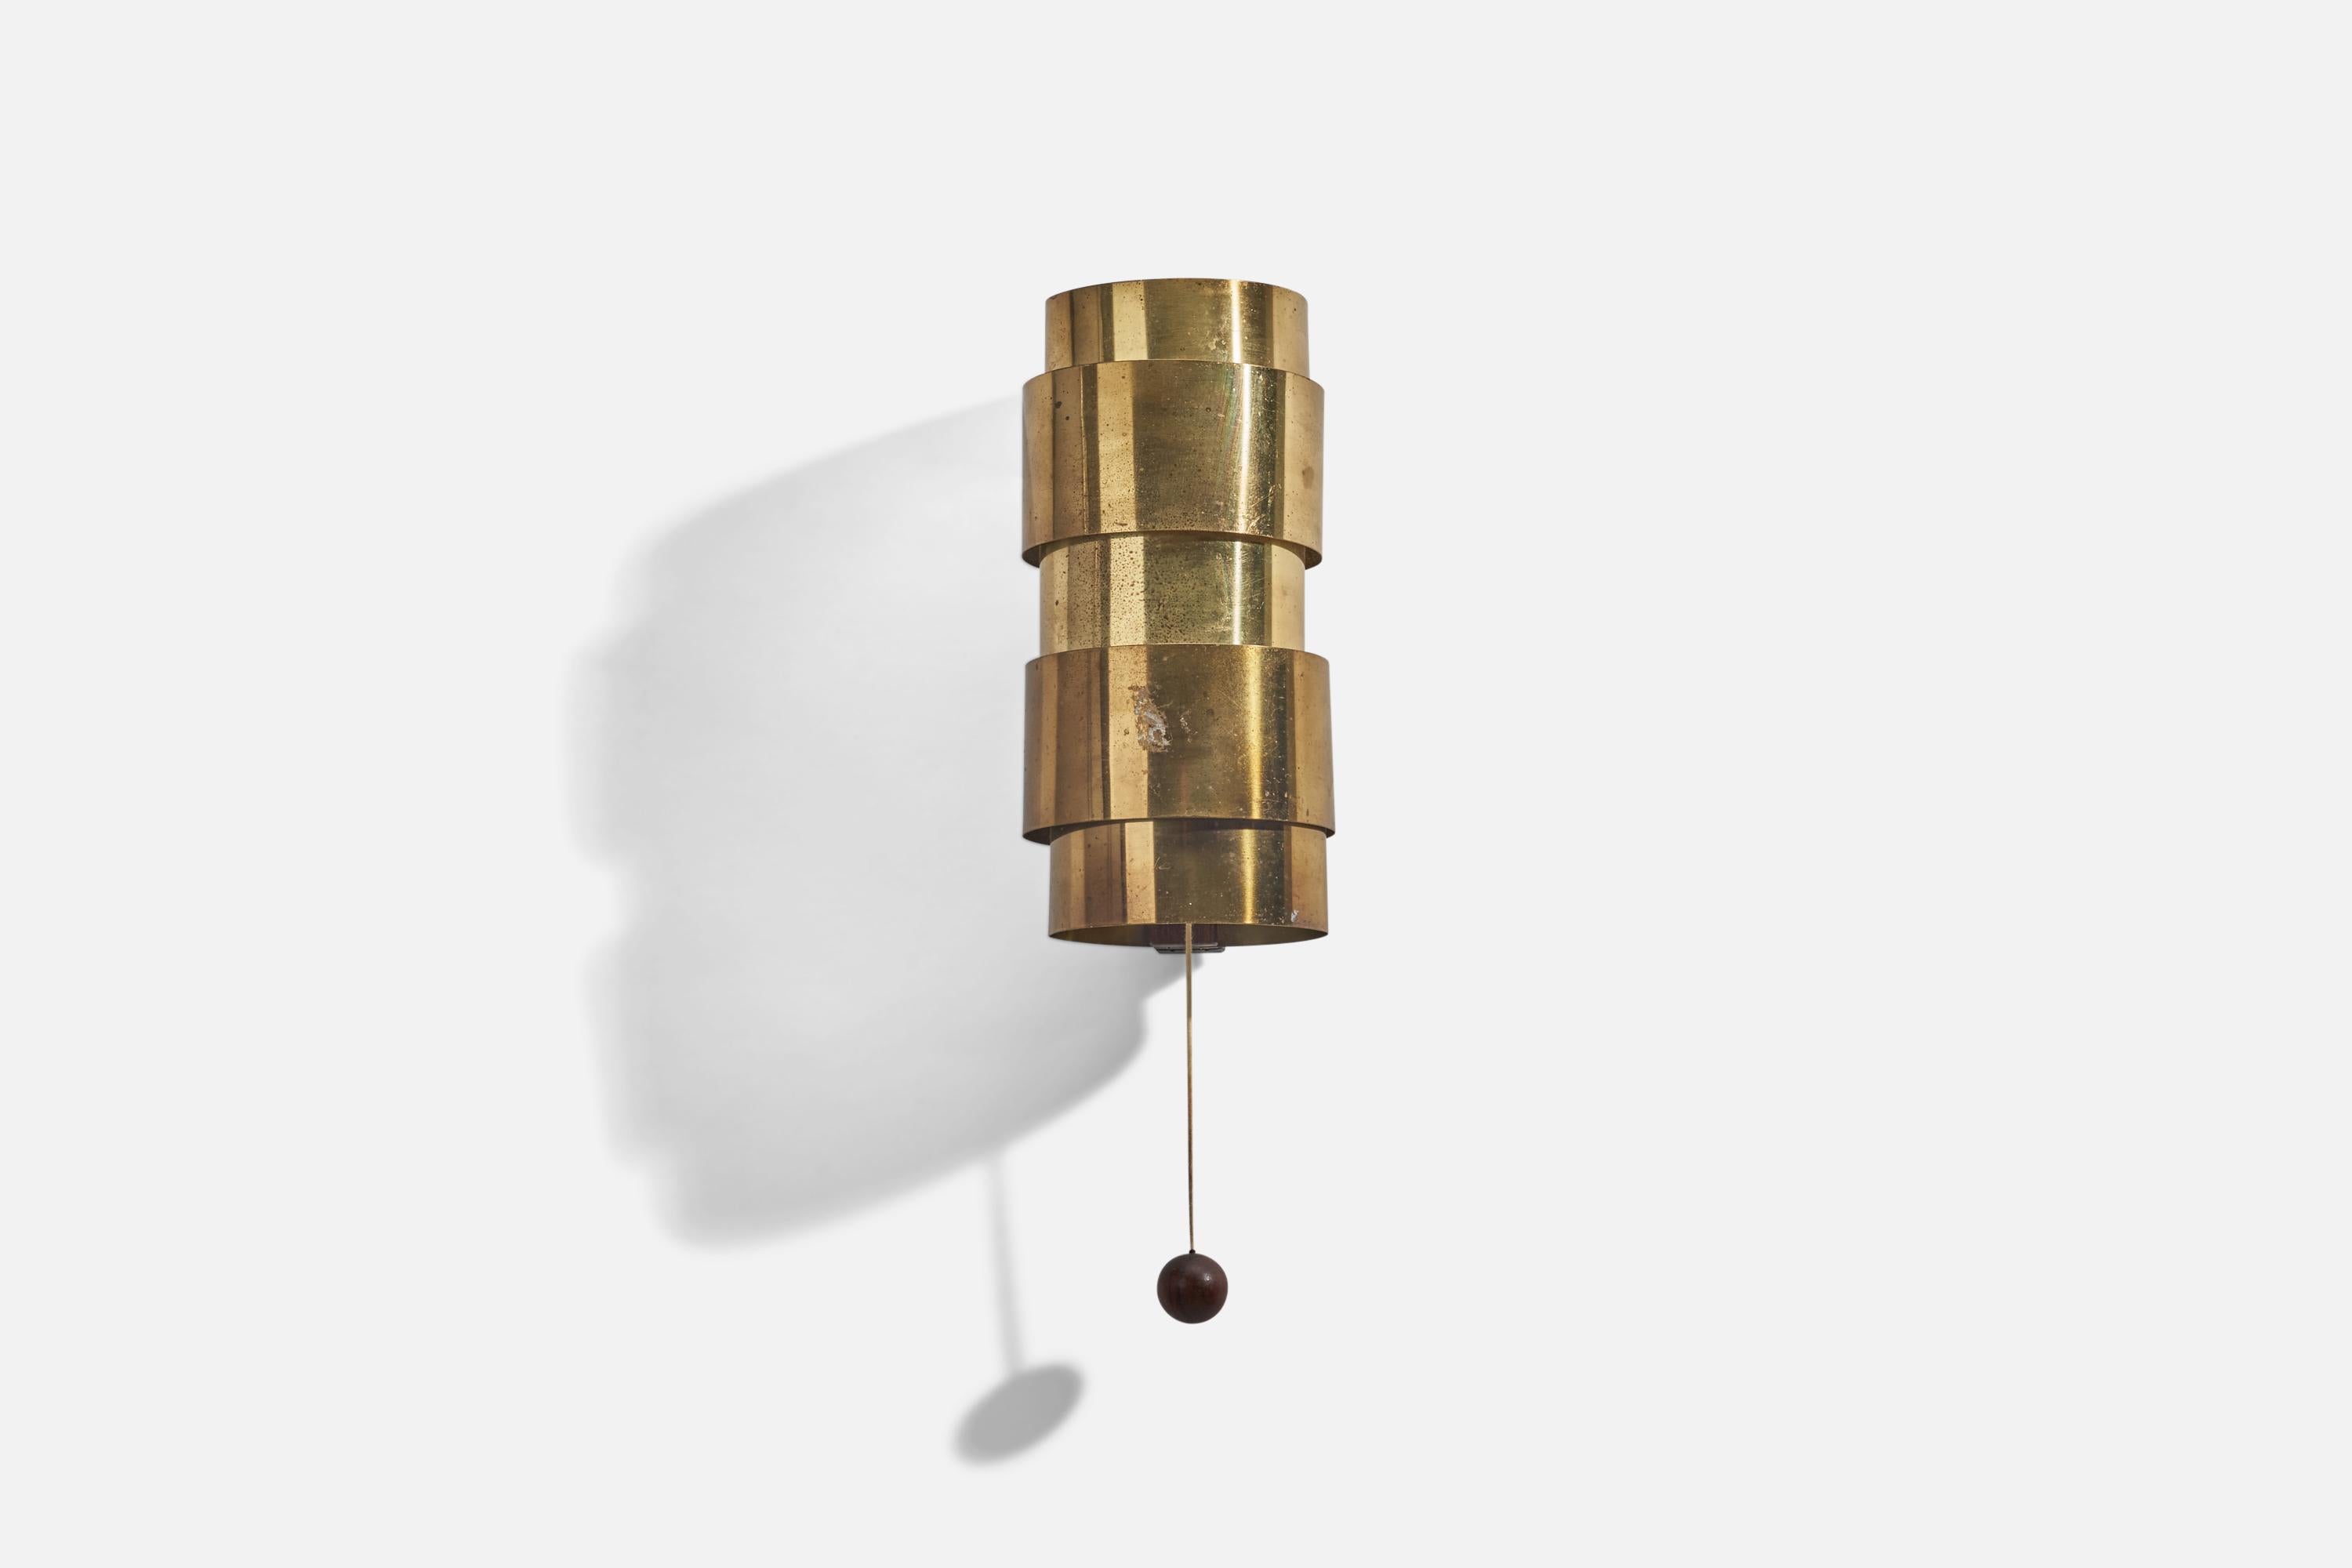 A pair of brass and wood sconces designed by Hans Agne Jakobsson and produced by Hans-Agne Jakobsson AB, Markaryd, Sweden, 1960s.

Dimensions of Back Plate (inches) : 9.06 x 0.96 x 1 (Height x Width x Depth)

Sockets take standard E-26 medium